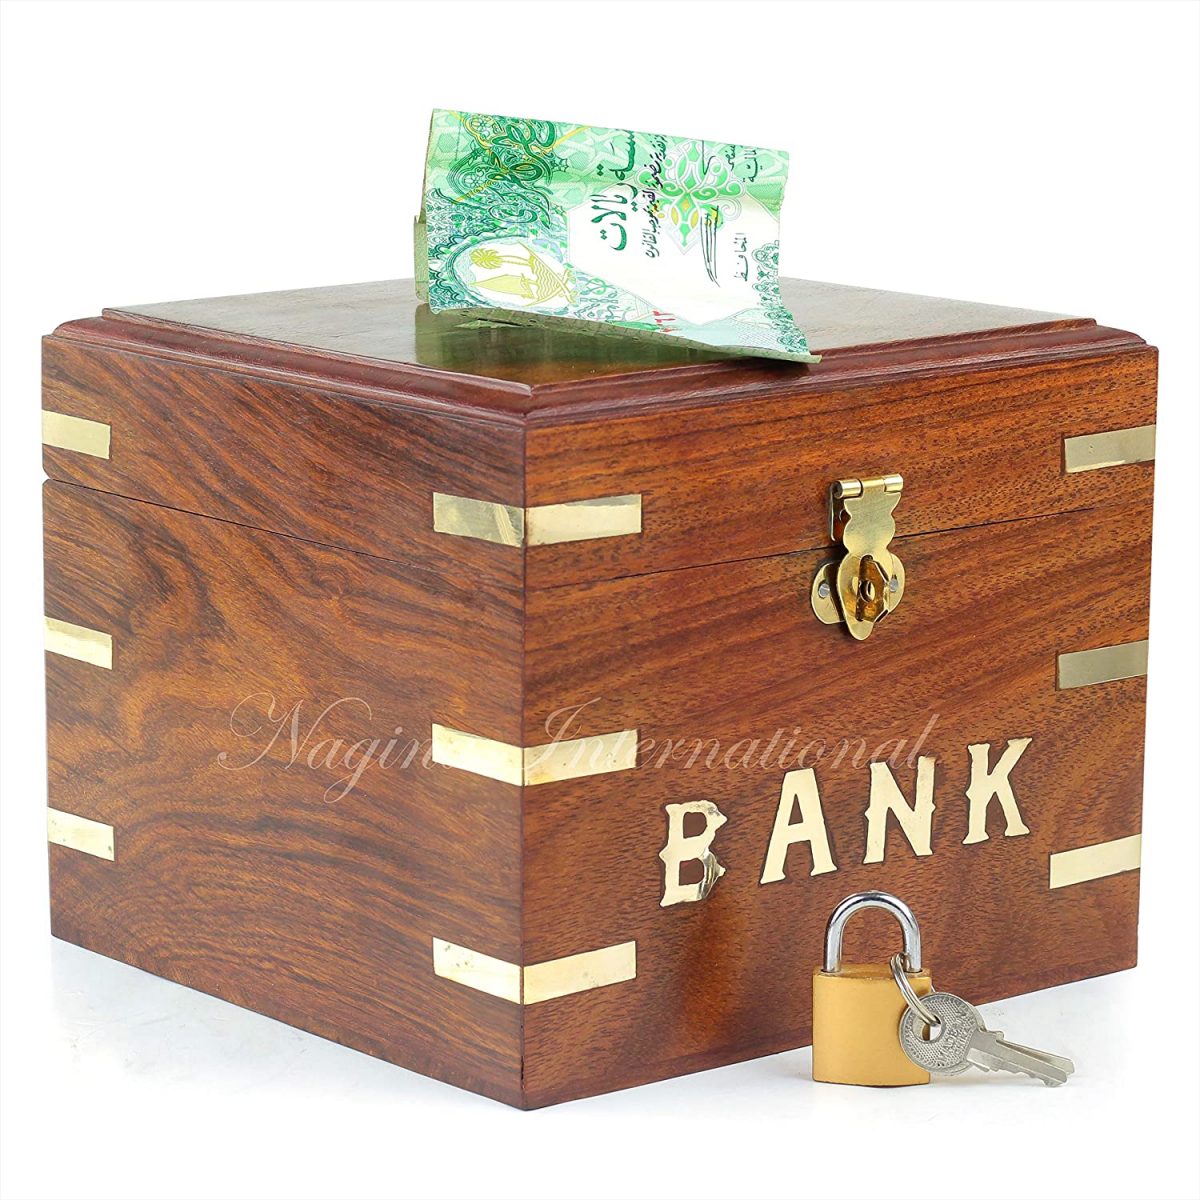 Wooden Money Bank Box Square Shaped With Mini Pad Lock | Handcrafted Piggy Bank | Children & Adults Gifts Ideas | Money Saving Coin Box | Brass Inlaid Corners | First Birthday Gifts Ideas